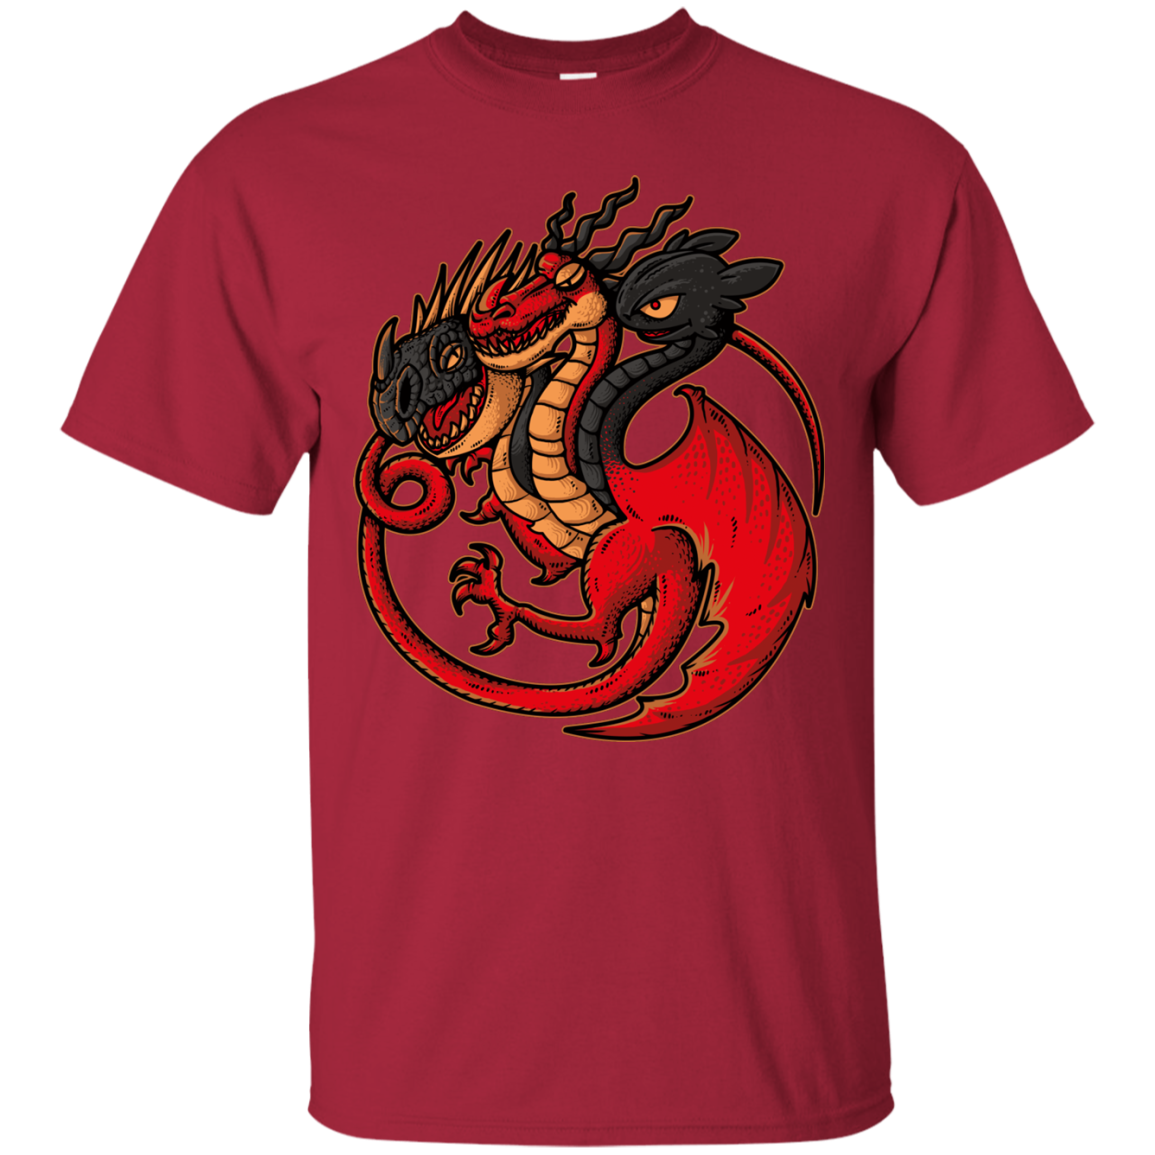 FIRE BLOOD AND TRAINING T-Shirt